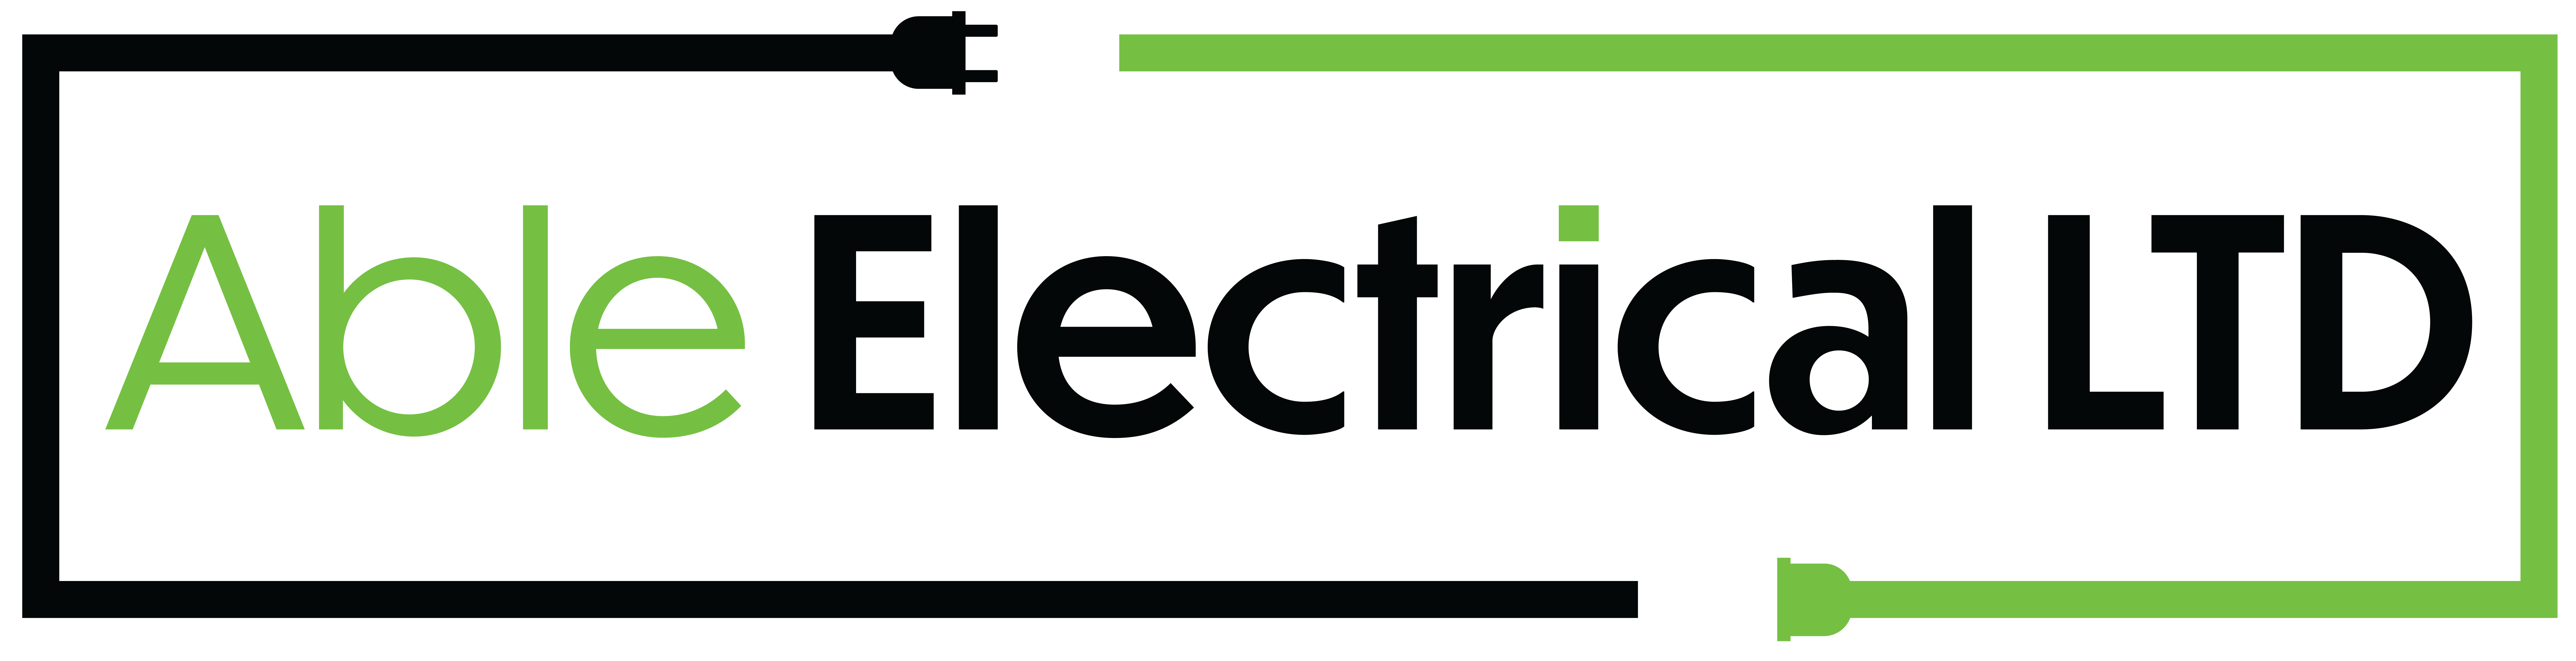 Electricians available on demand